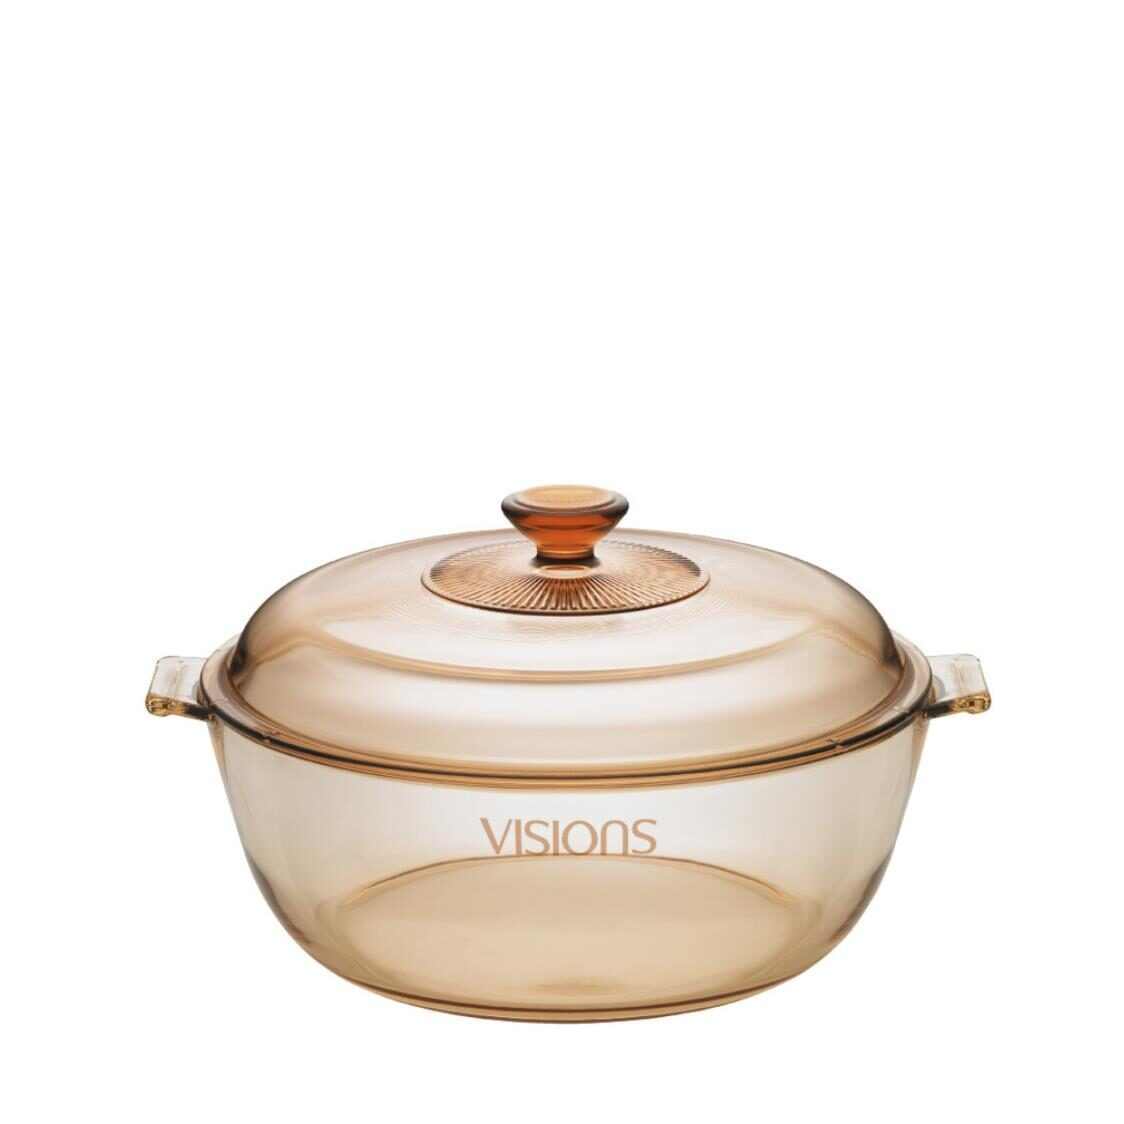 World Kitchen High Heat Cooker & Visions 4L Covered Stockpot